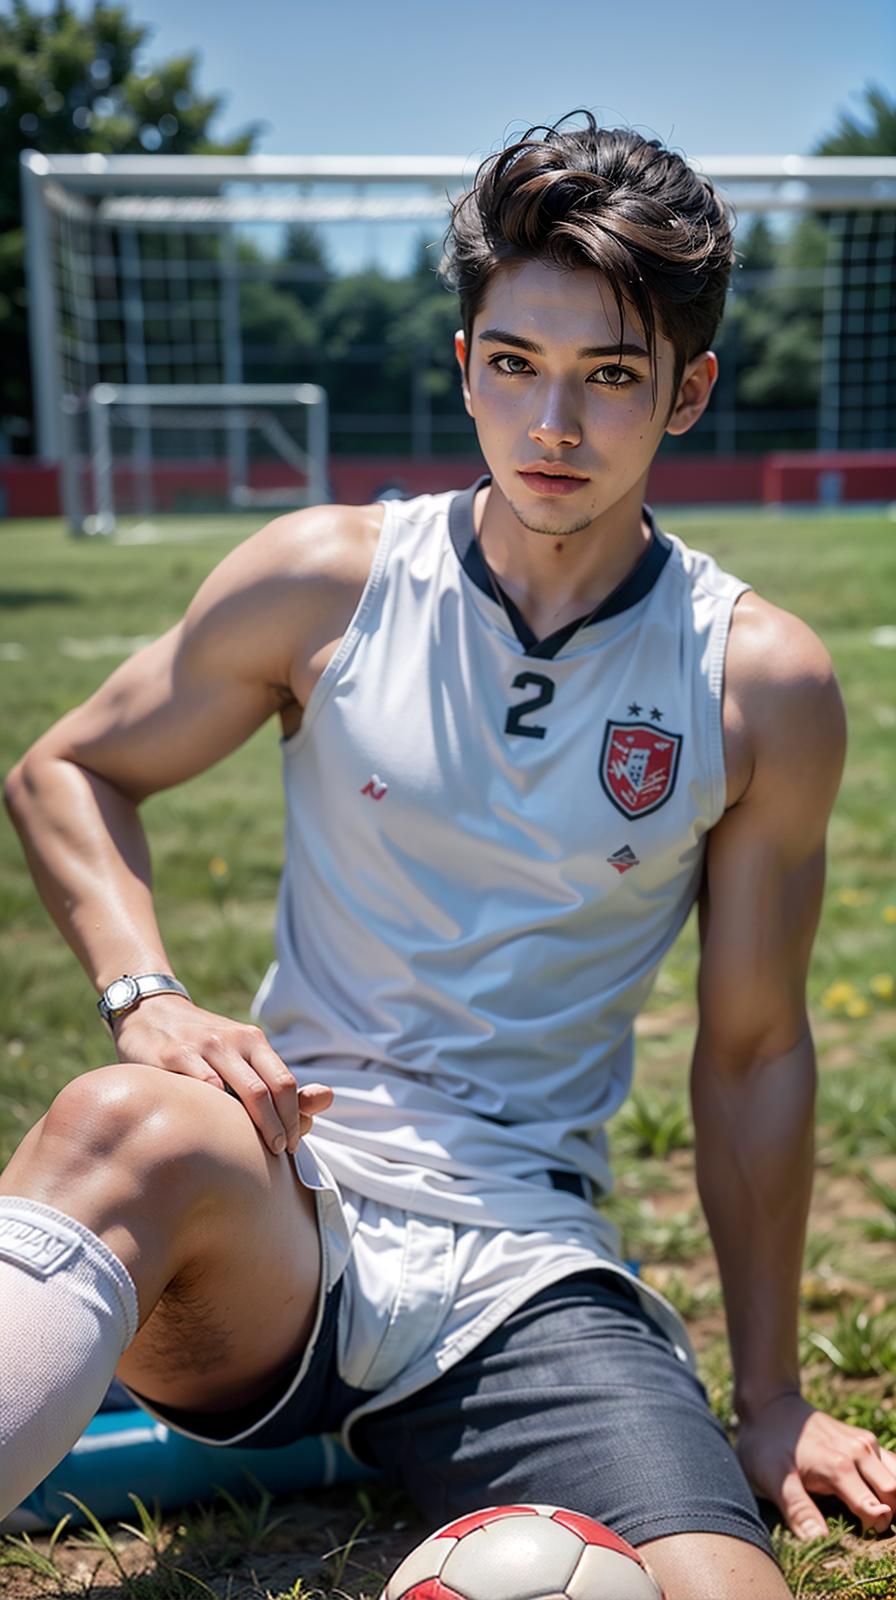  ultra high res, (photorealistic:1.4), raw photo, (realistic face), realistic eyes, (realistic skin), <lora:XXMix9_v20LoRa:0.8>, handsome, (male:2), (asian:1.6), (soccer players:1.2), (short hair:1.2), (pompadour:1.4), (white briefs:1.3), (sleeveless:1.2), spike shoes, (soccer shin guards:1.3), young, sitting posture, (spread legs:1.1), real skin, (sexy posing:1.3), hot guy, (muscular:1.3), (naked:1.1), (bulge:1.1), trained calves, thigh, realistic, lifelike, high quality, photos taken with a single-lens reflex camera, (looking at the camera:1.2)